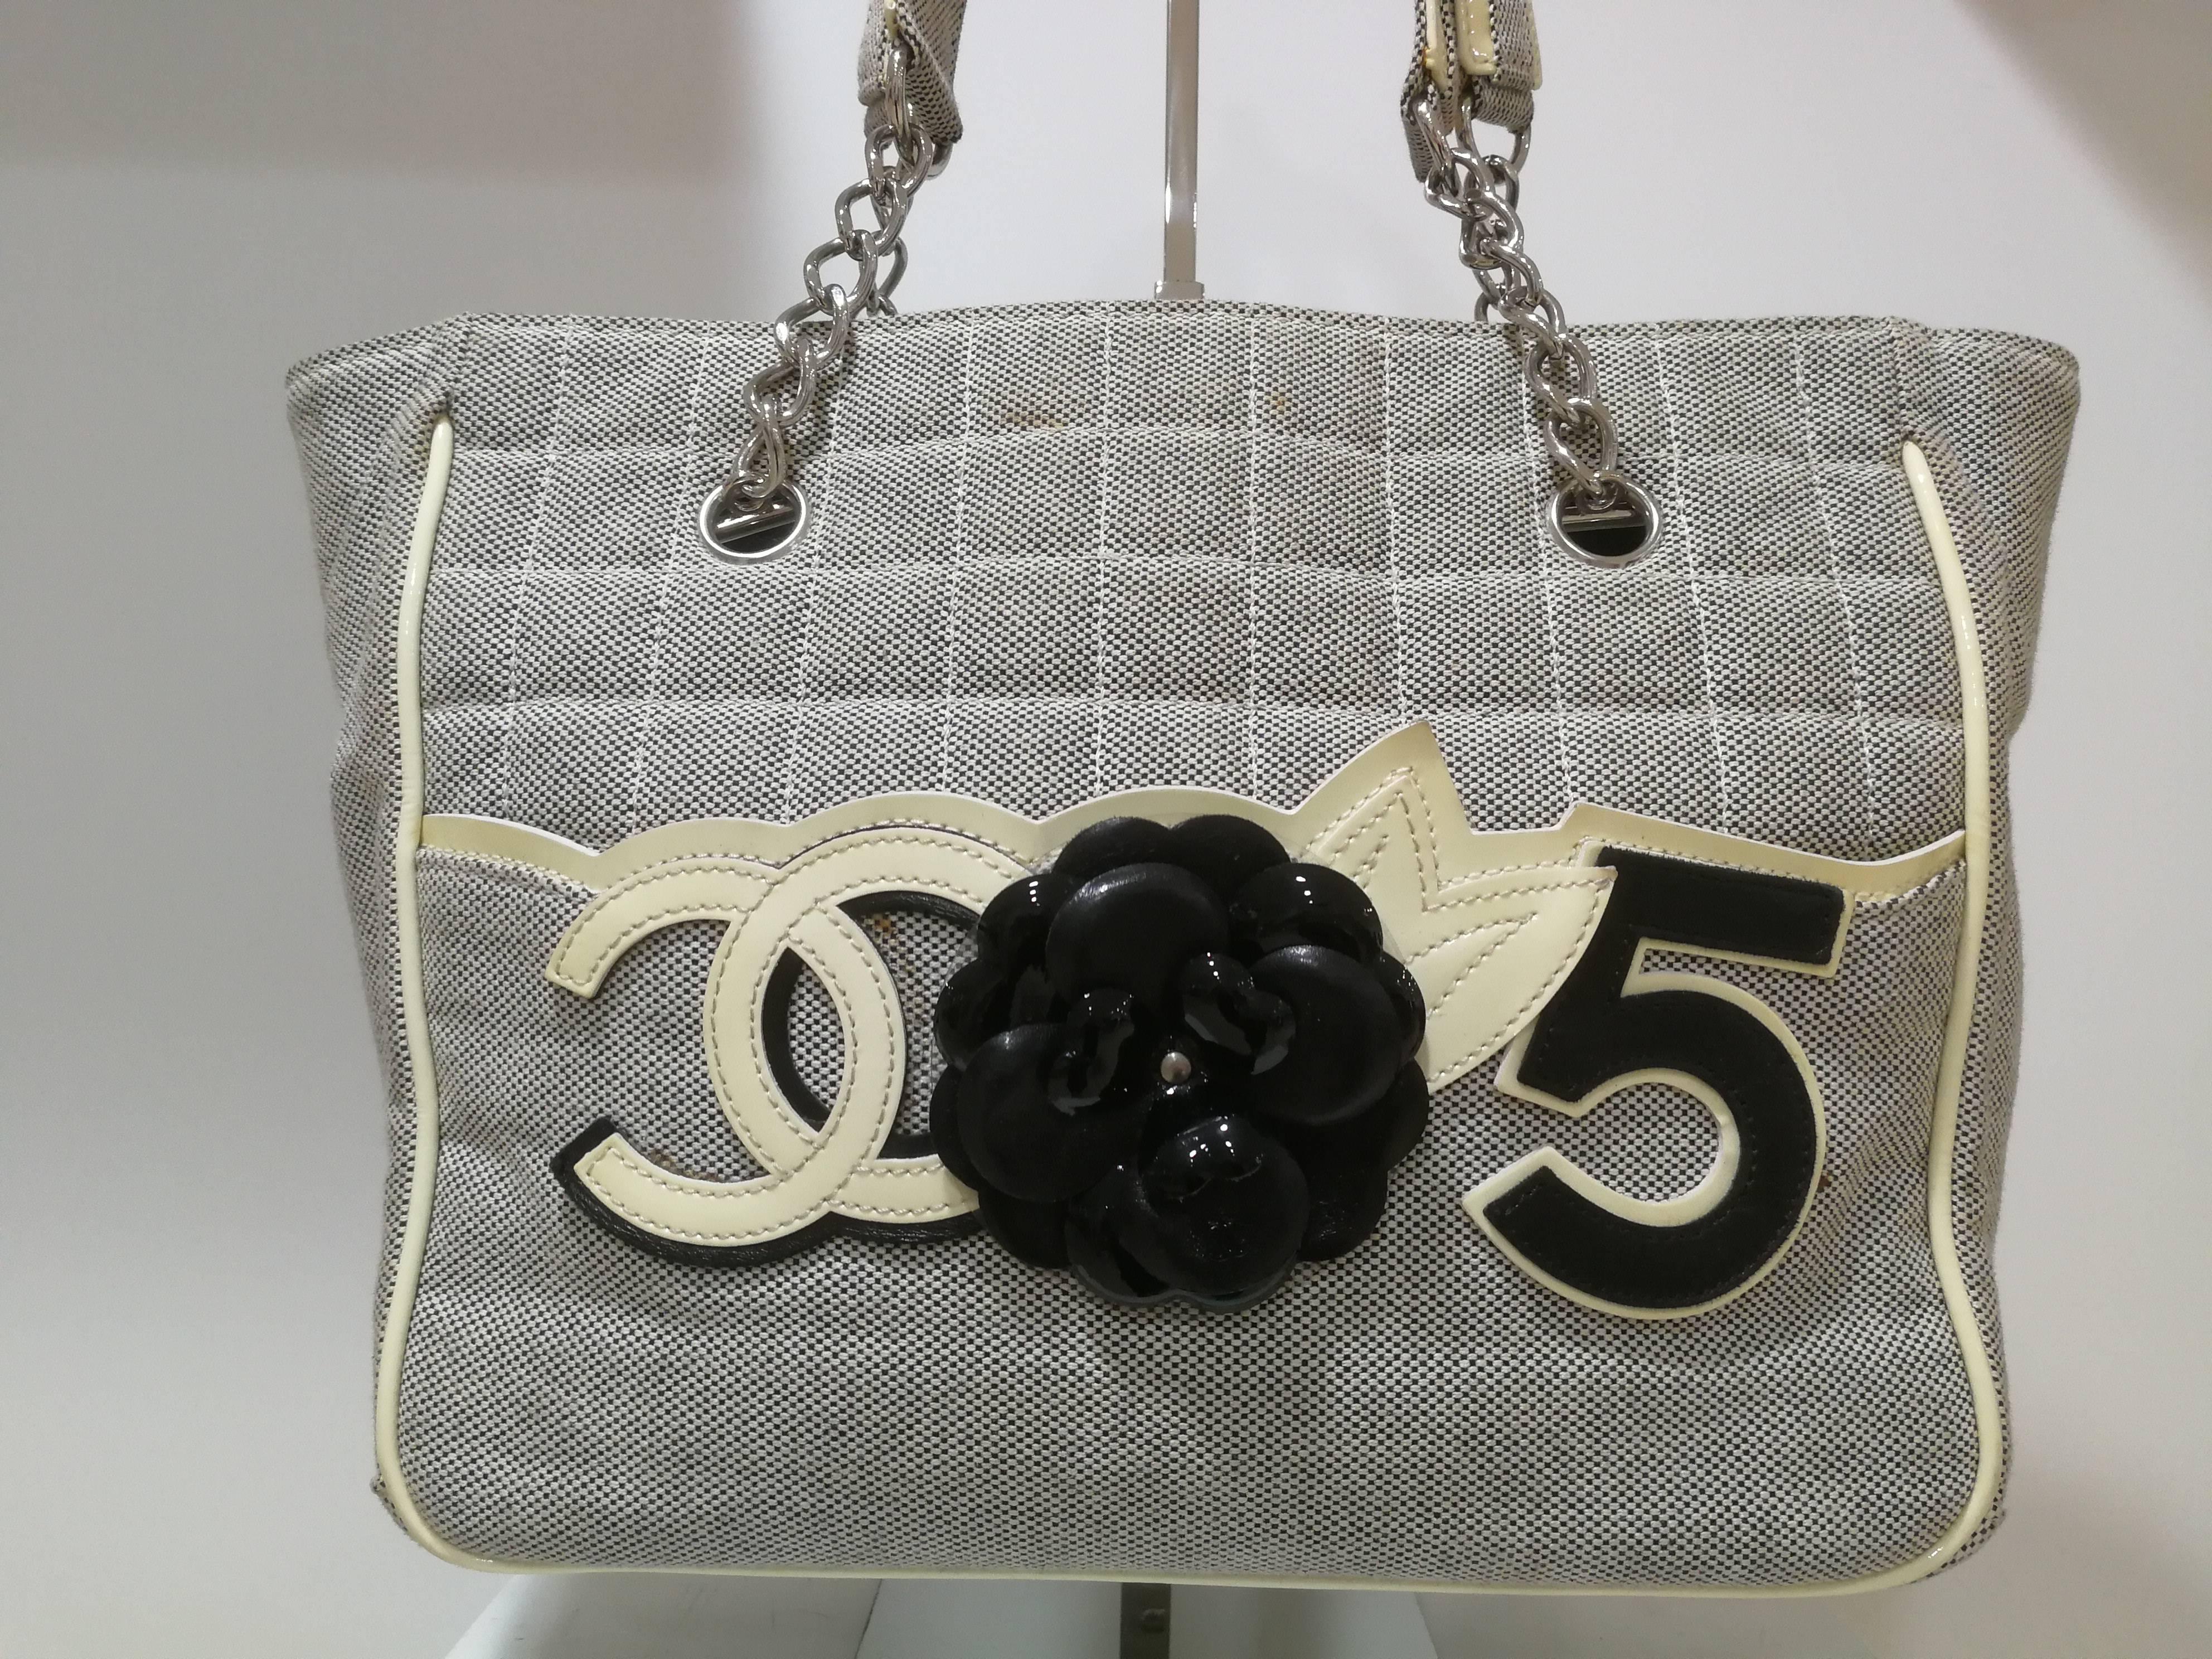 Chanel Camelia 5 Shopping Bag

Grey and white with black camelia and 5 Chanel shoulder bag